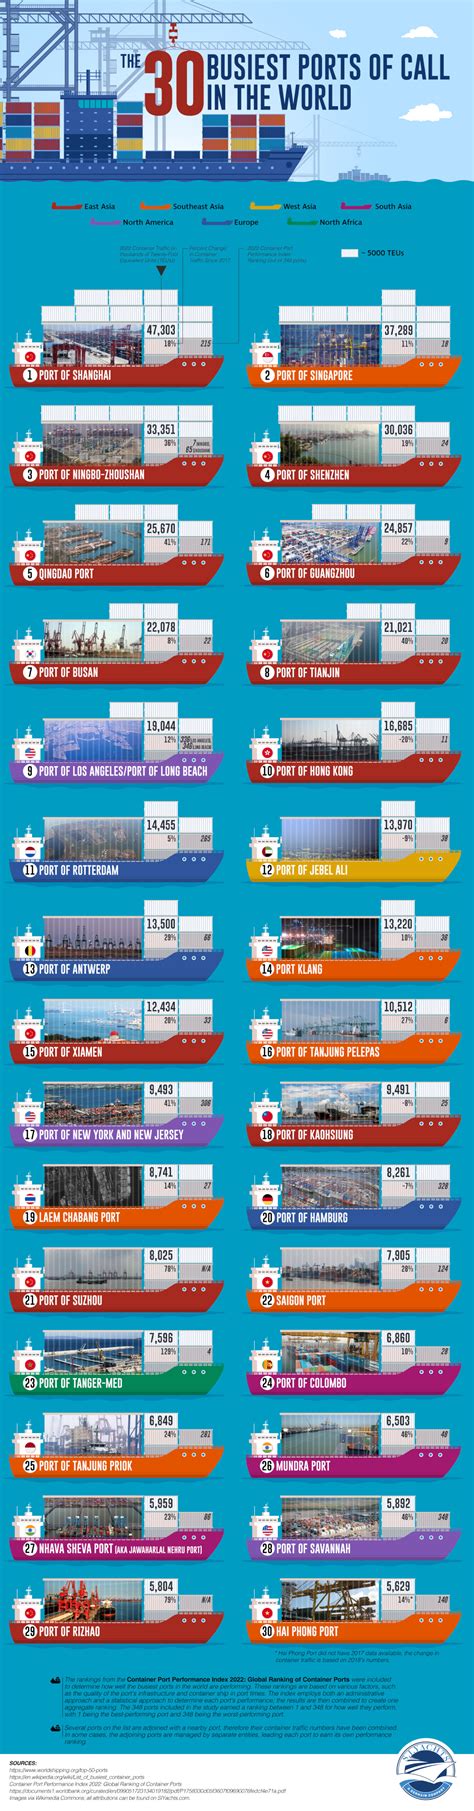 The 30 Busiest Ports Of Call In The World